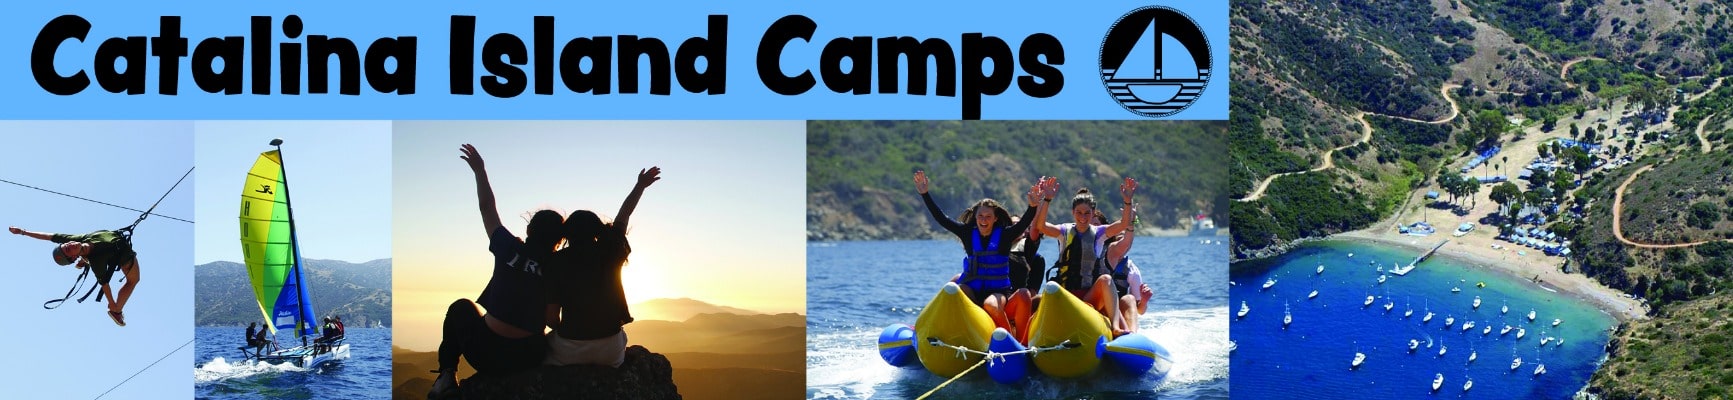 Catalina Island Camps banner ad with many camp activities like sailing and ropes course and a birds-eye view of the camp site.